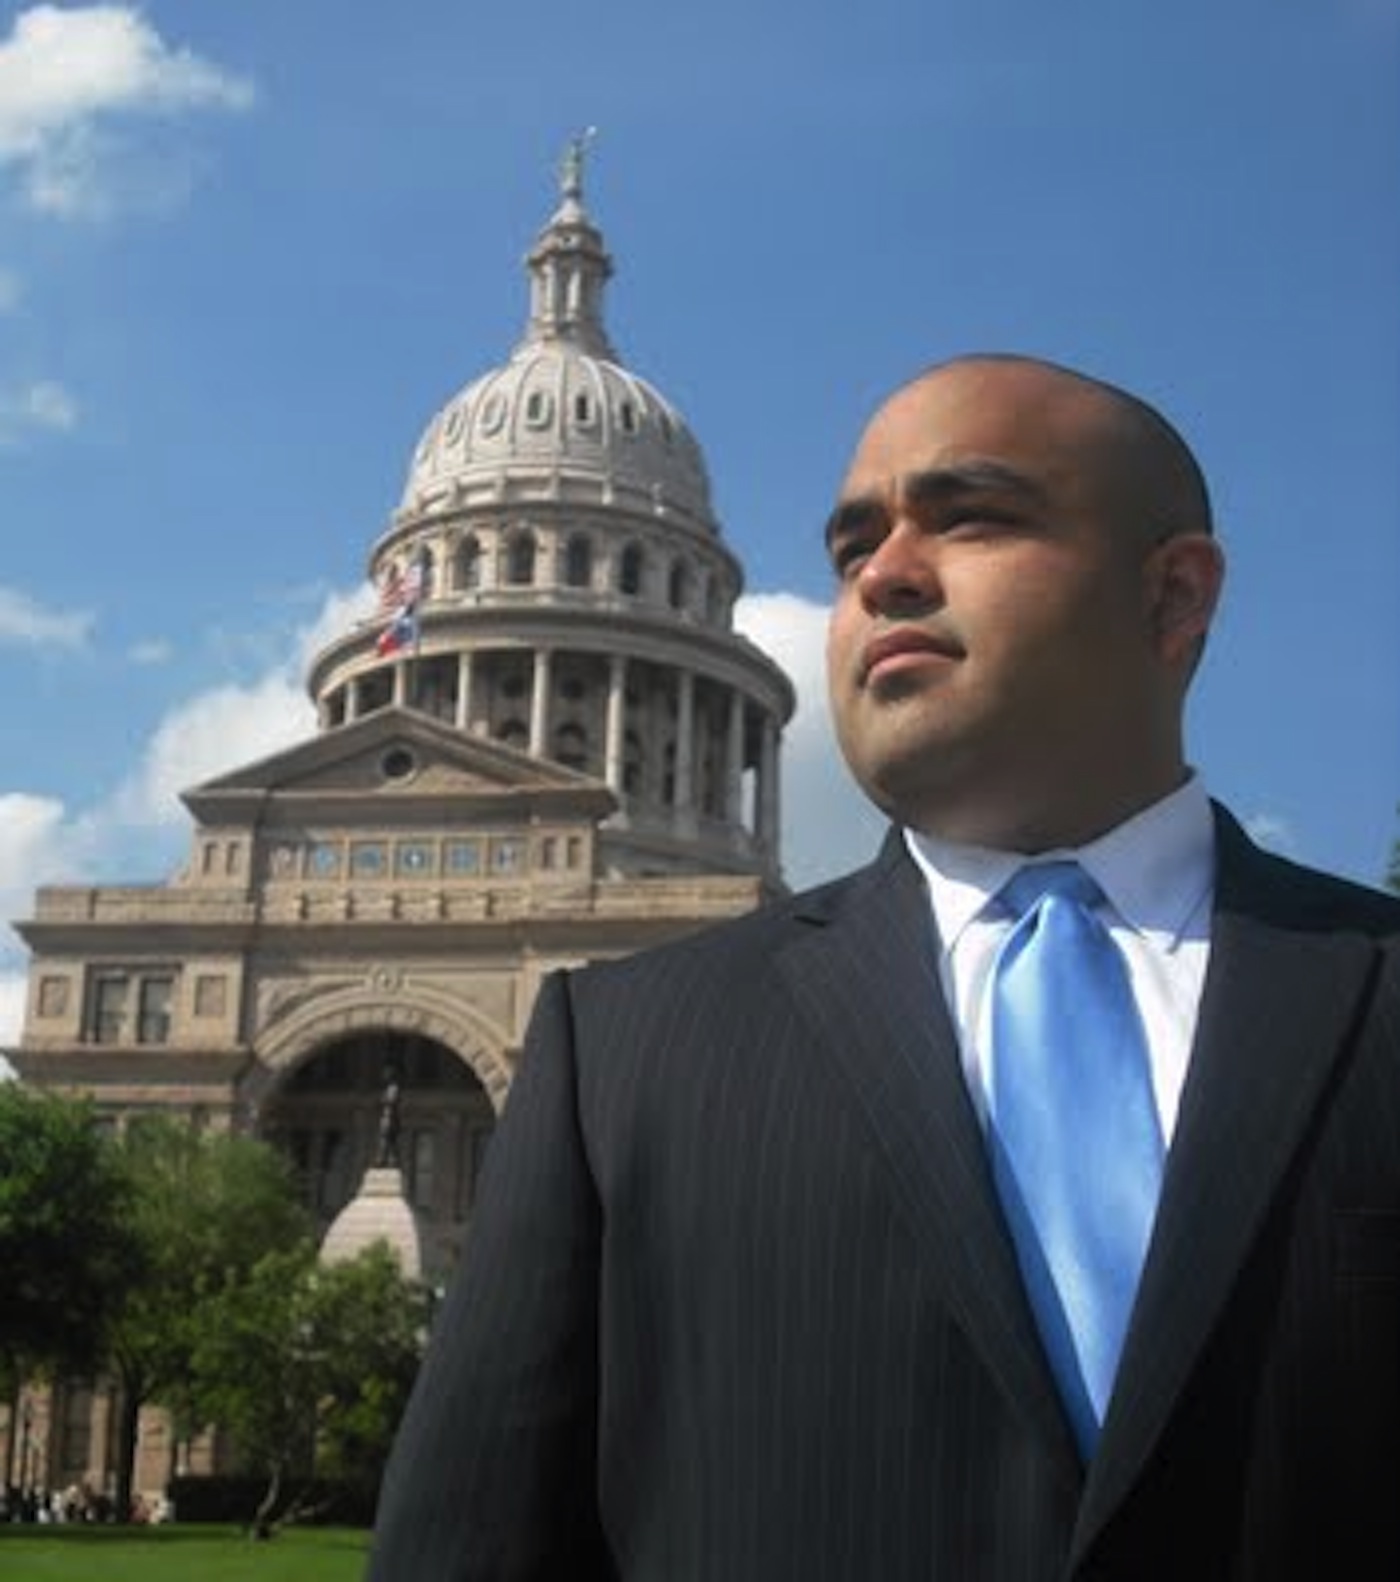 Criminal Lawyer Austin Tx: Everything You Need To Know